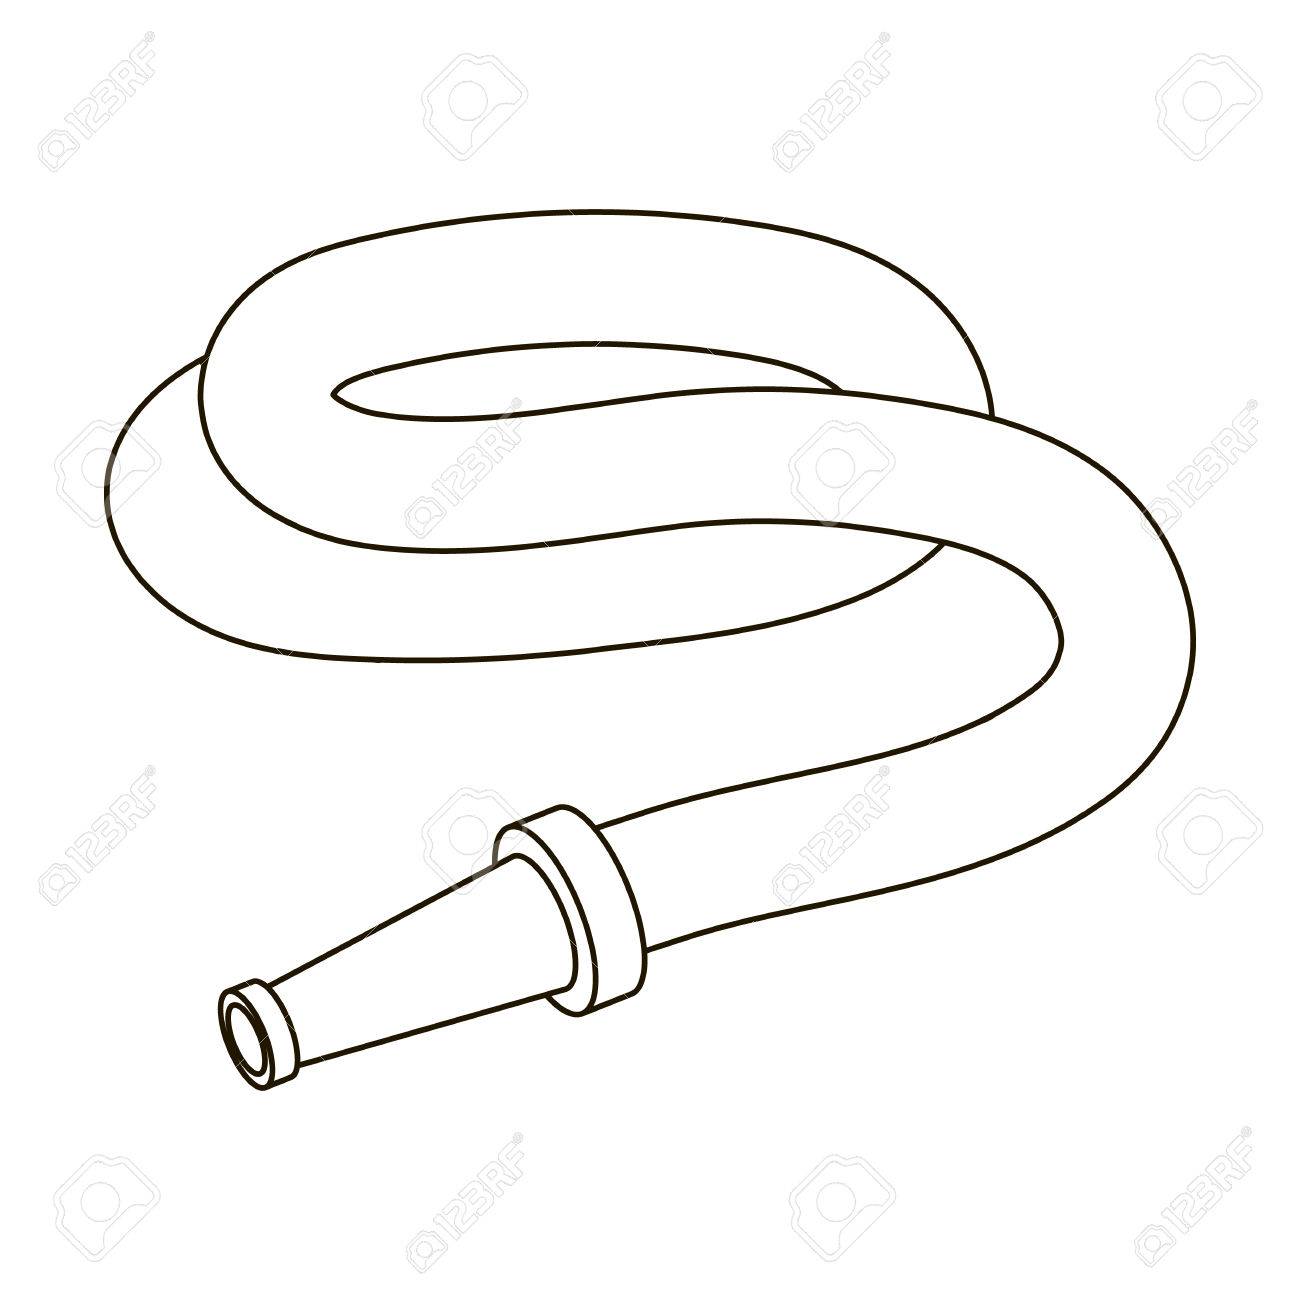 The best free Hose drawing images. Download from 117 free drawings of